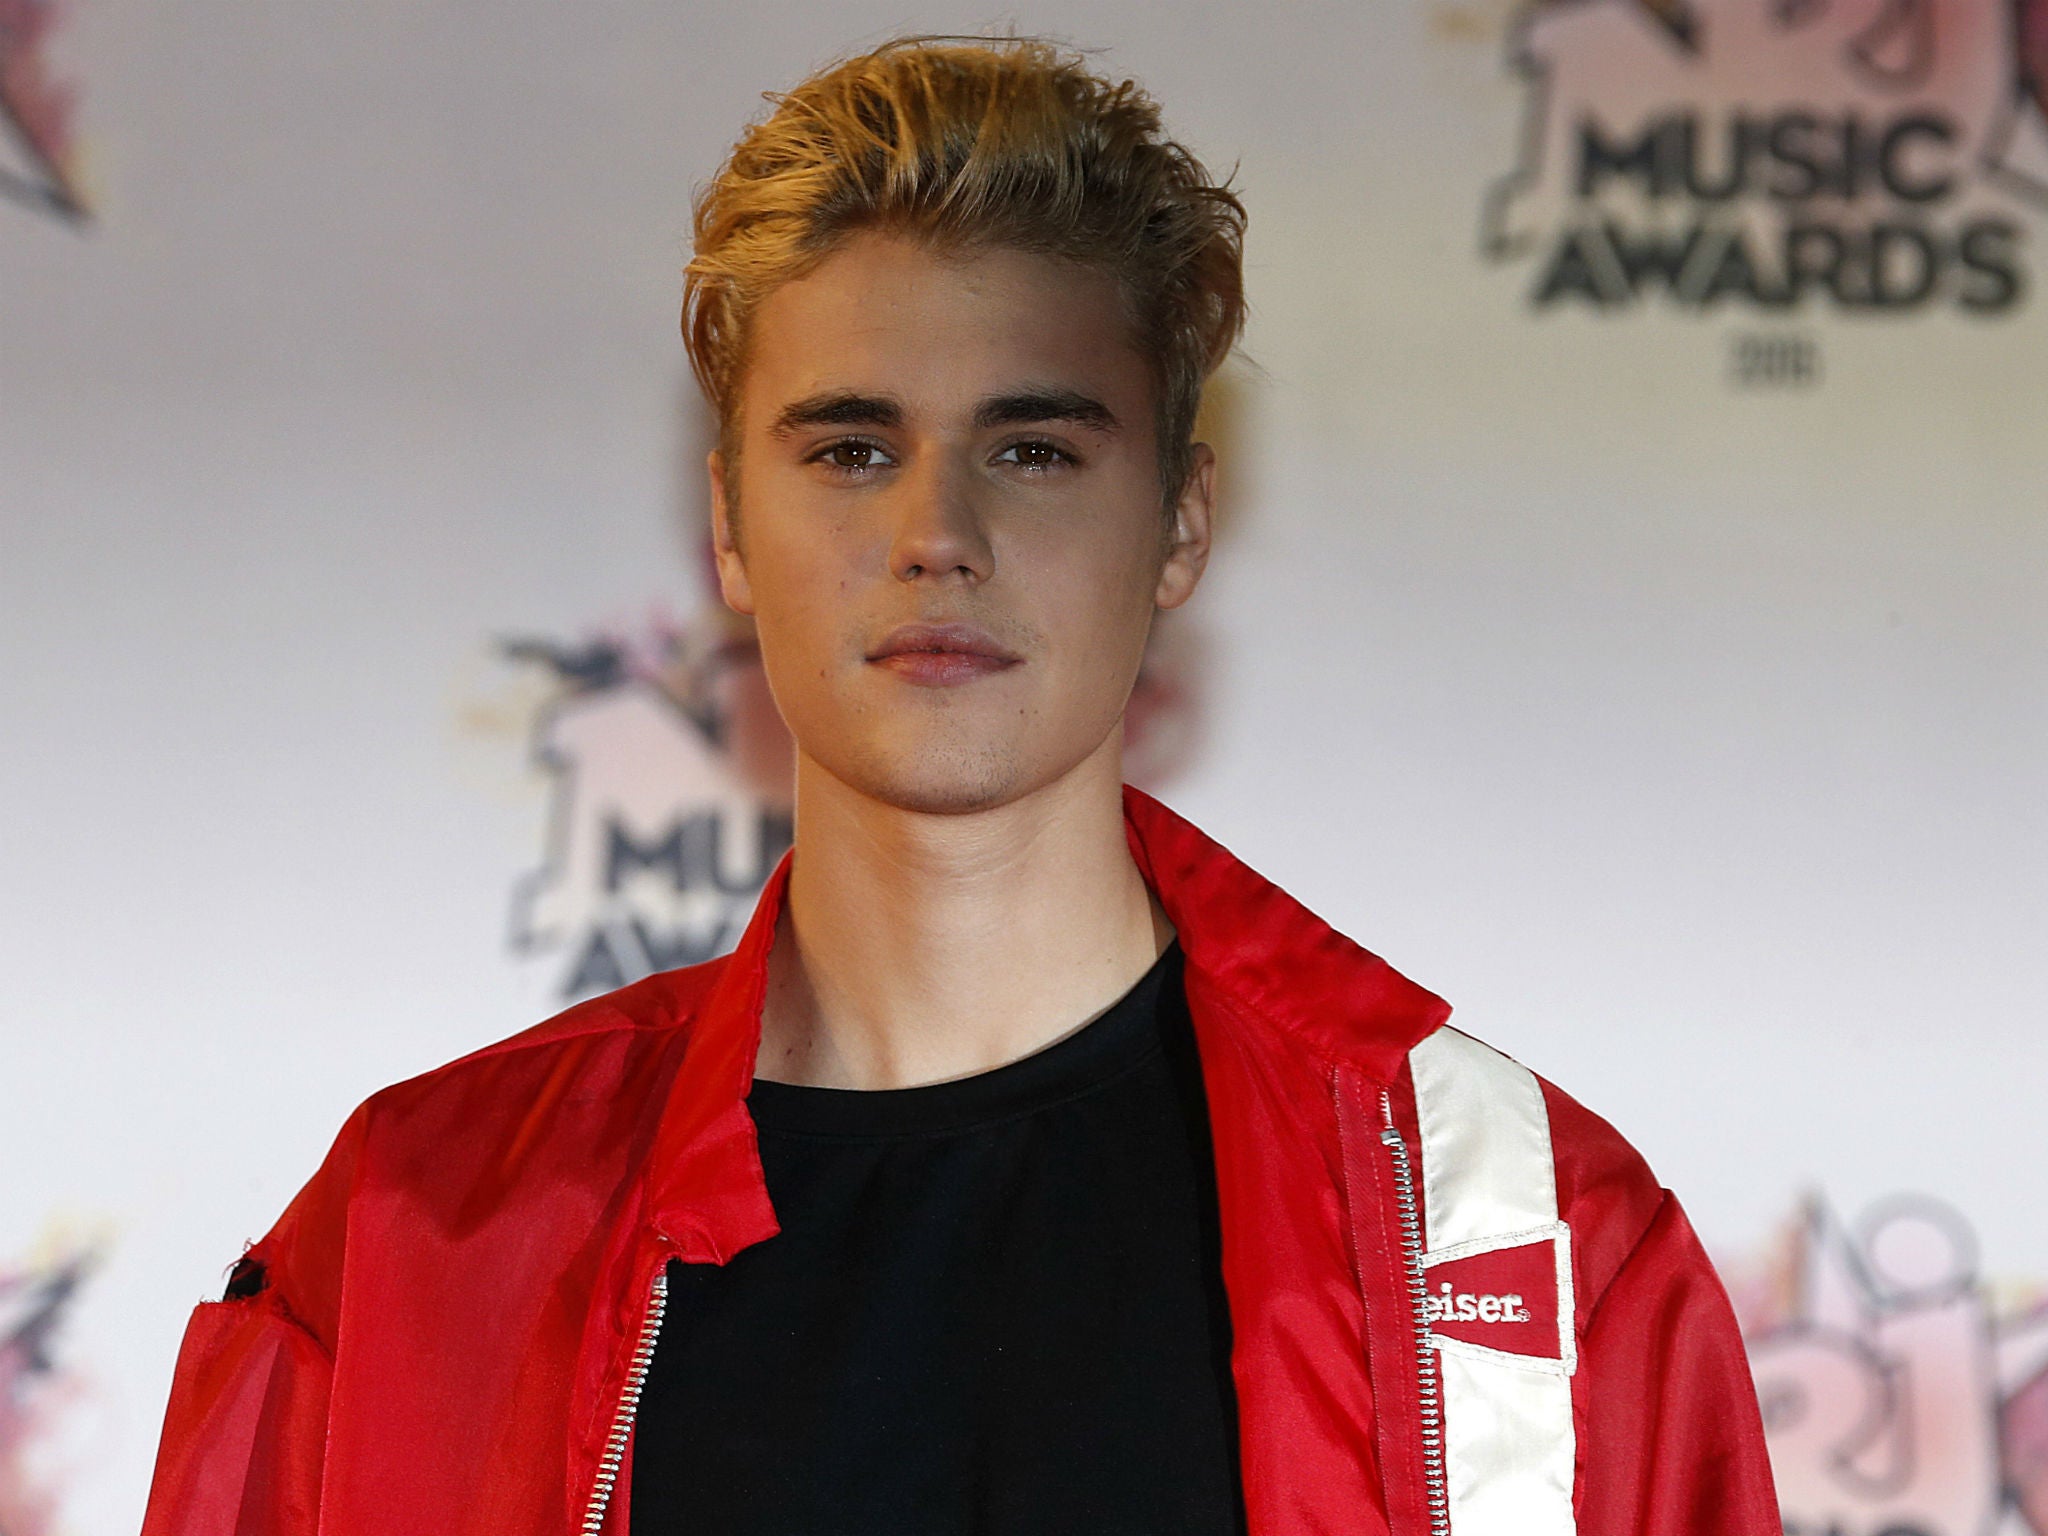 Bieber thanked his friend for 'everything you did for me'